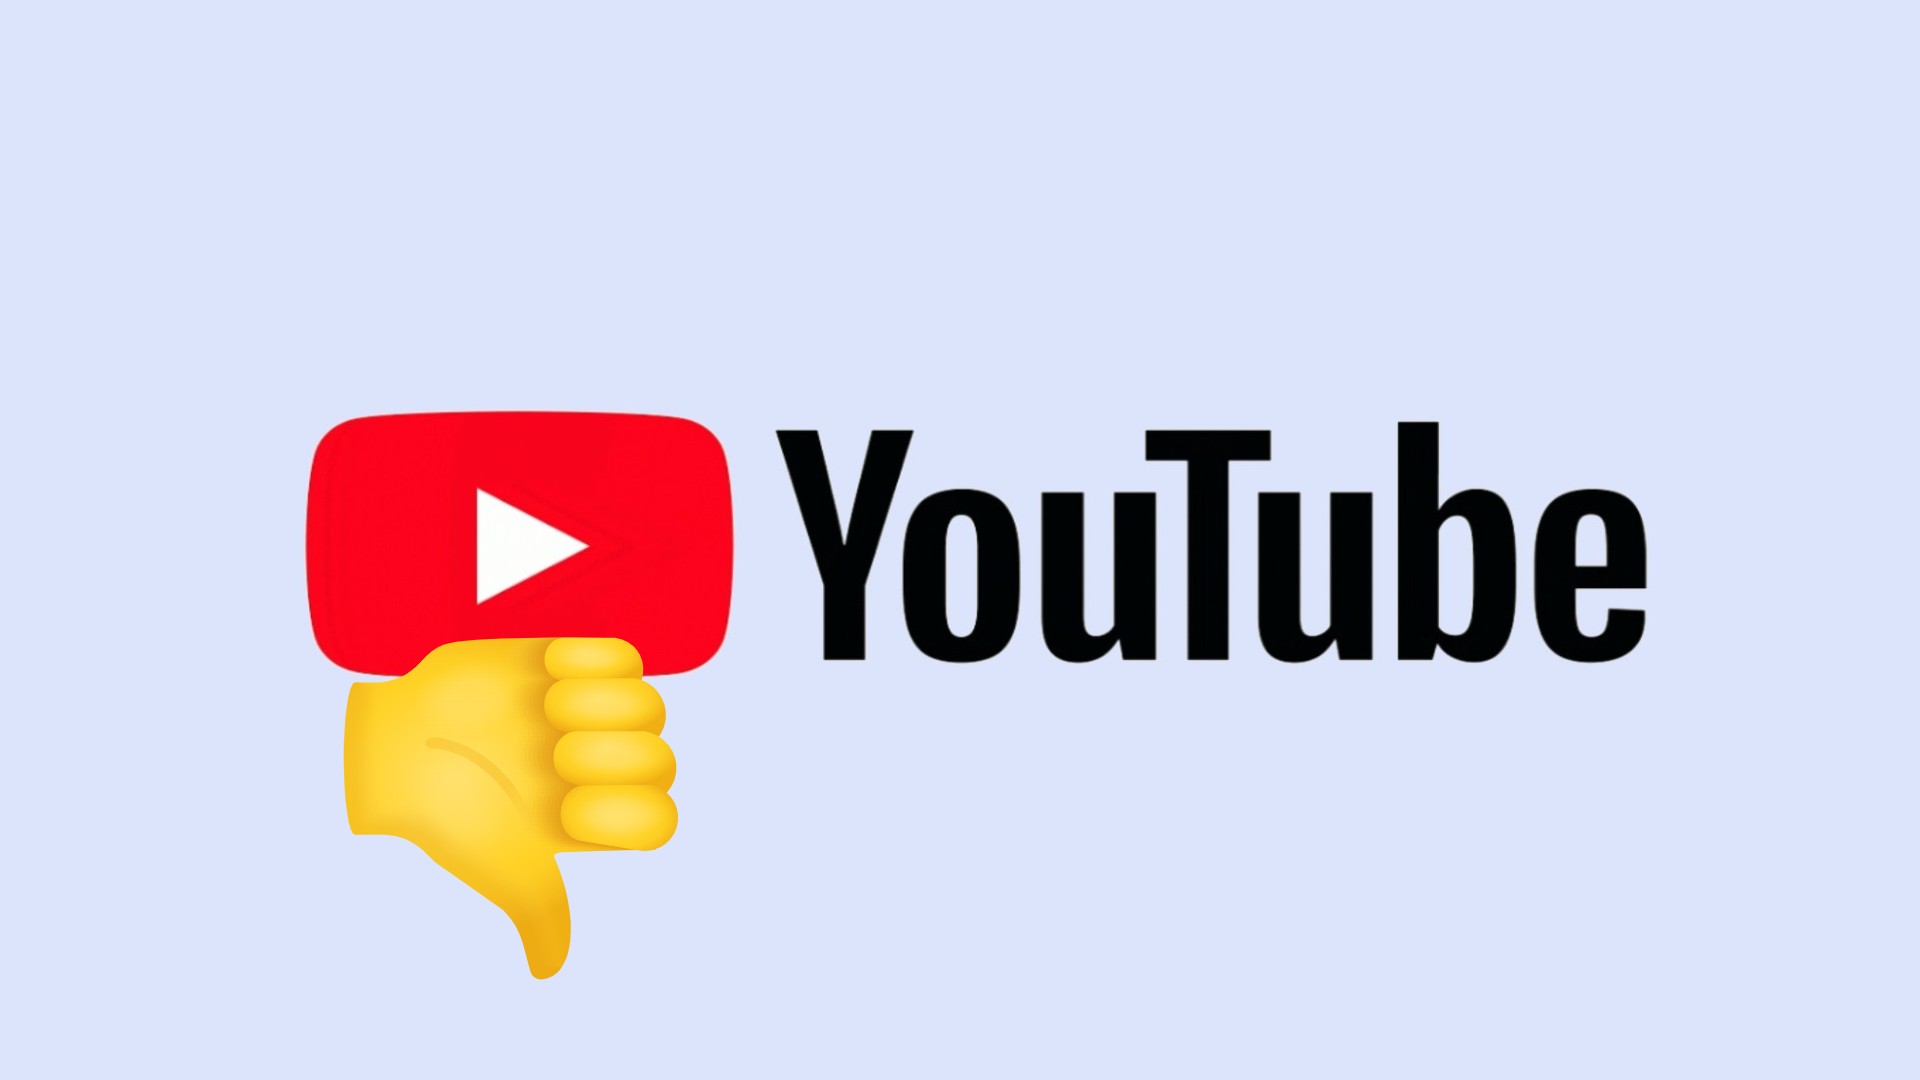 YouTube logo with a thumbs down emoji next to it